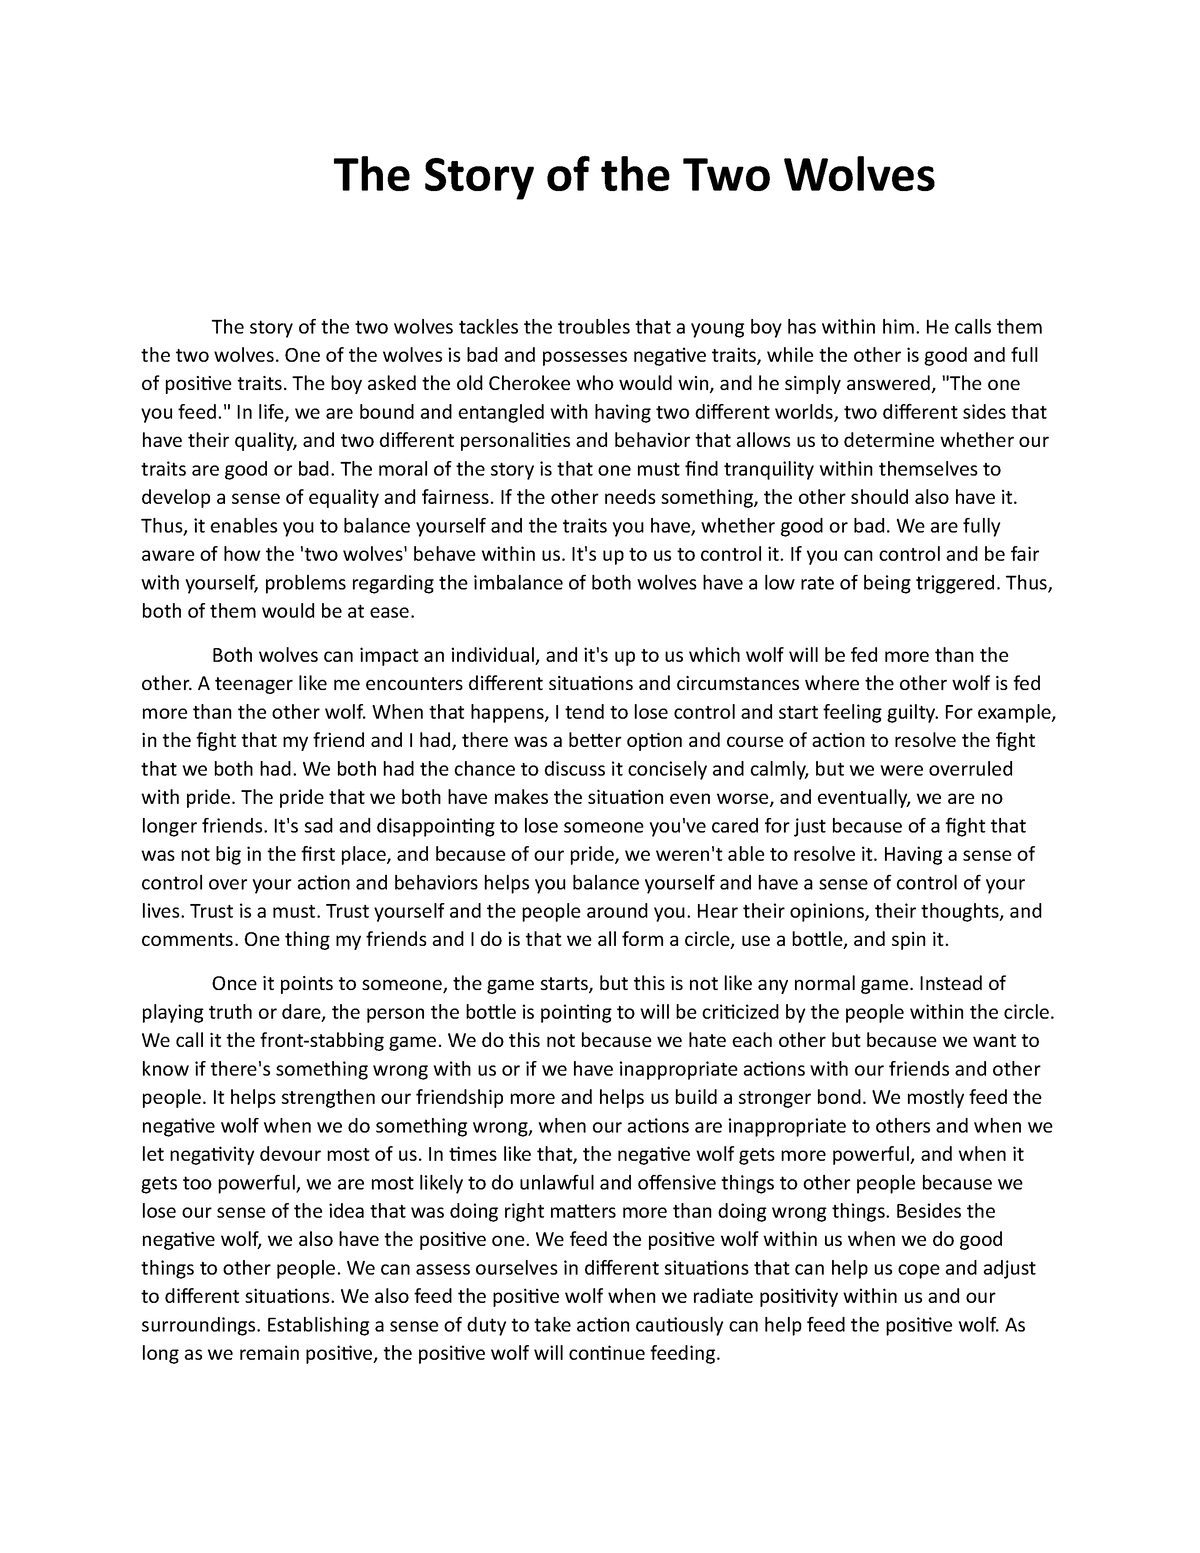 two wolves essay prompts